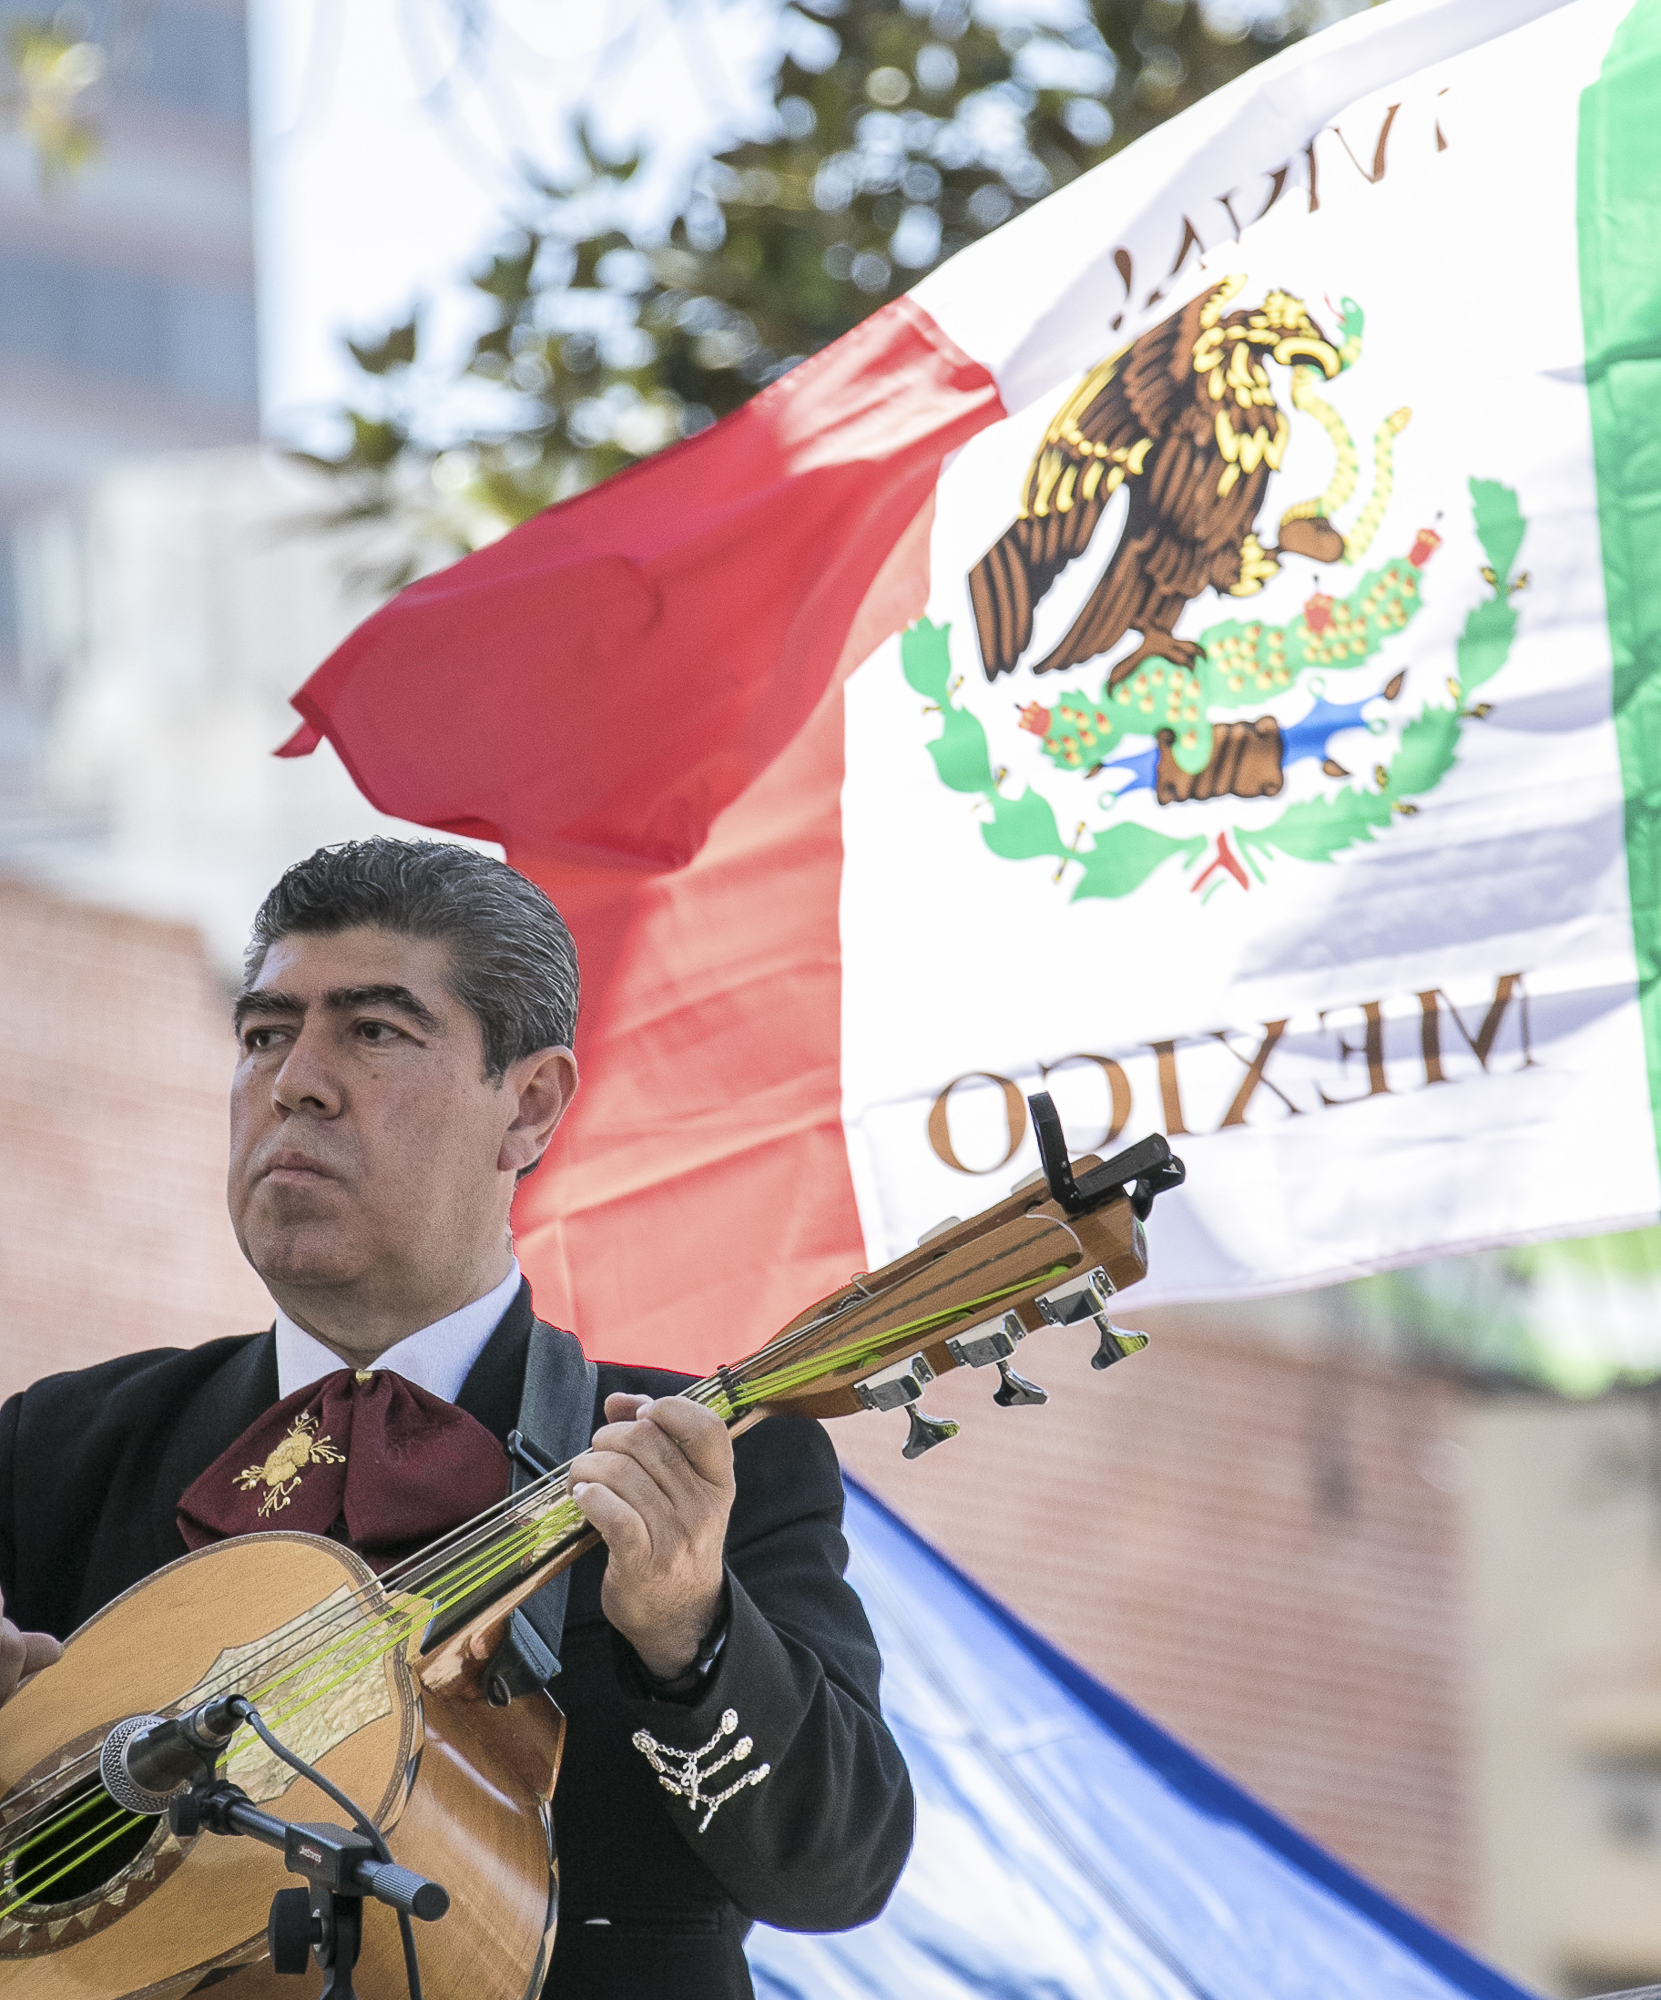  Celebrations for Cinco De Mayo as the mariachi band plays for the crowd at El Pueblo de Los Angeles Historic Monument on  Olvera Street on May 5th, 2018.(Downtown, Los Angeles, California, Saturday, May 5th, 2018.) (Ashutosh Bikram Singh/Corsair Pho